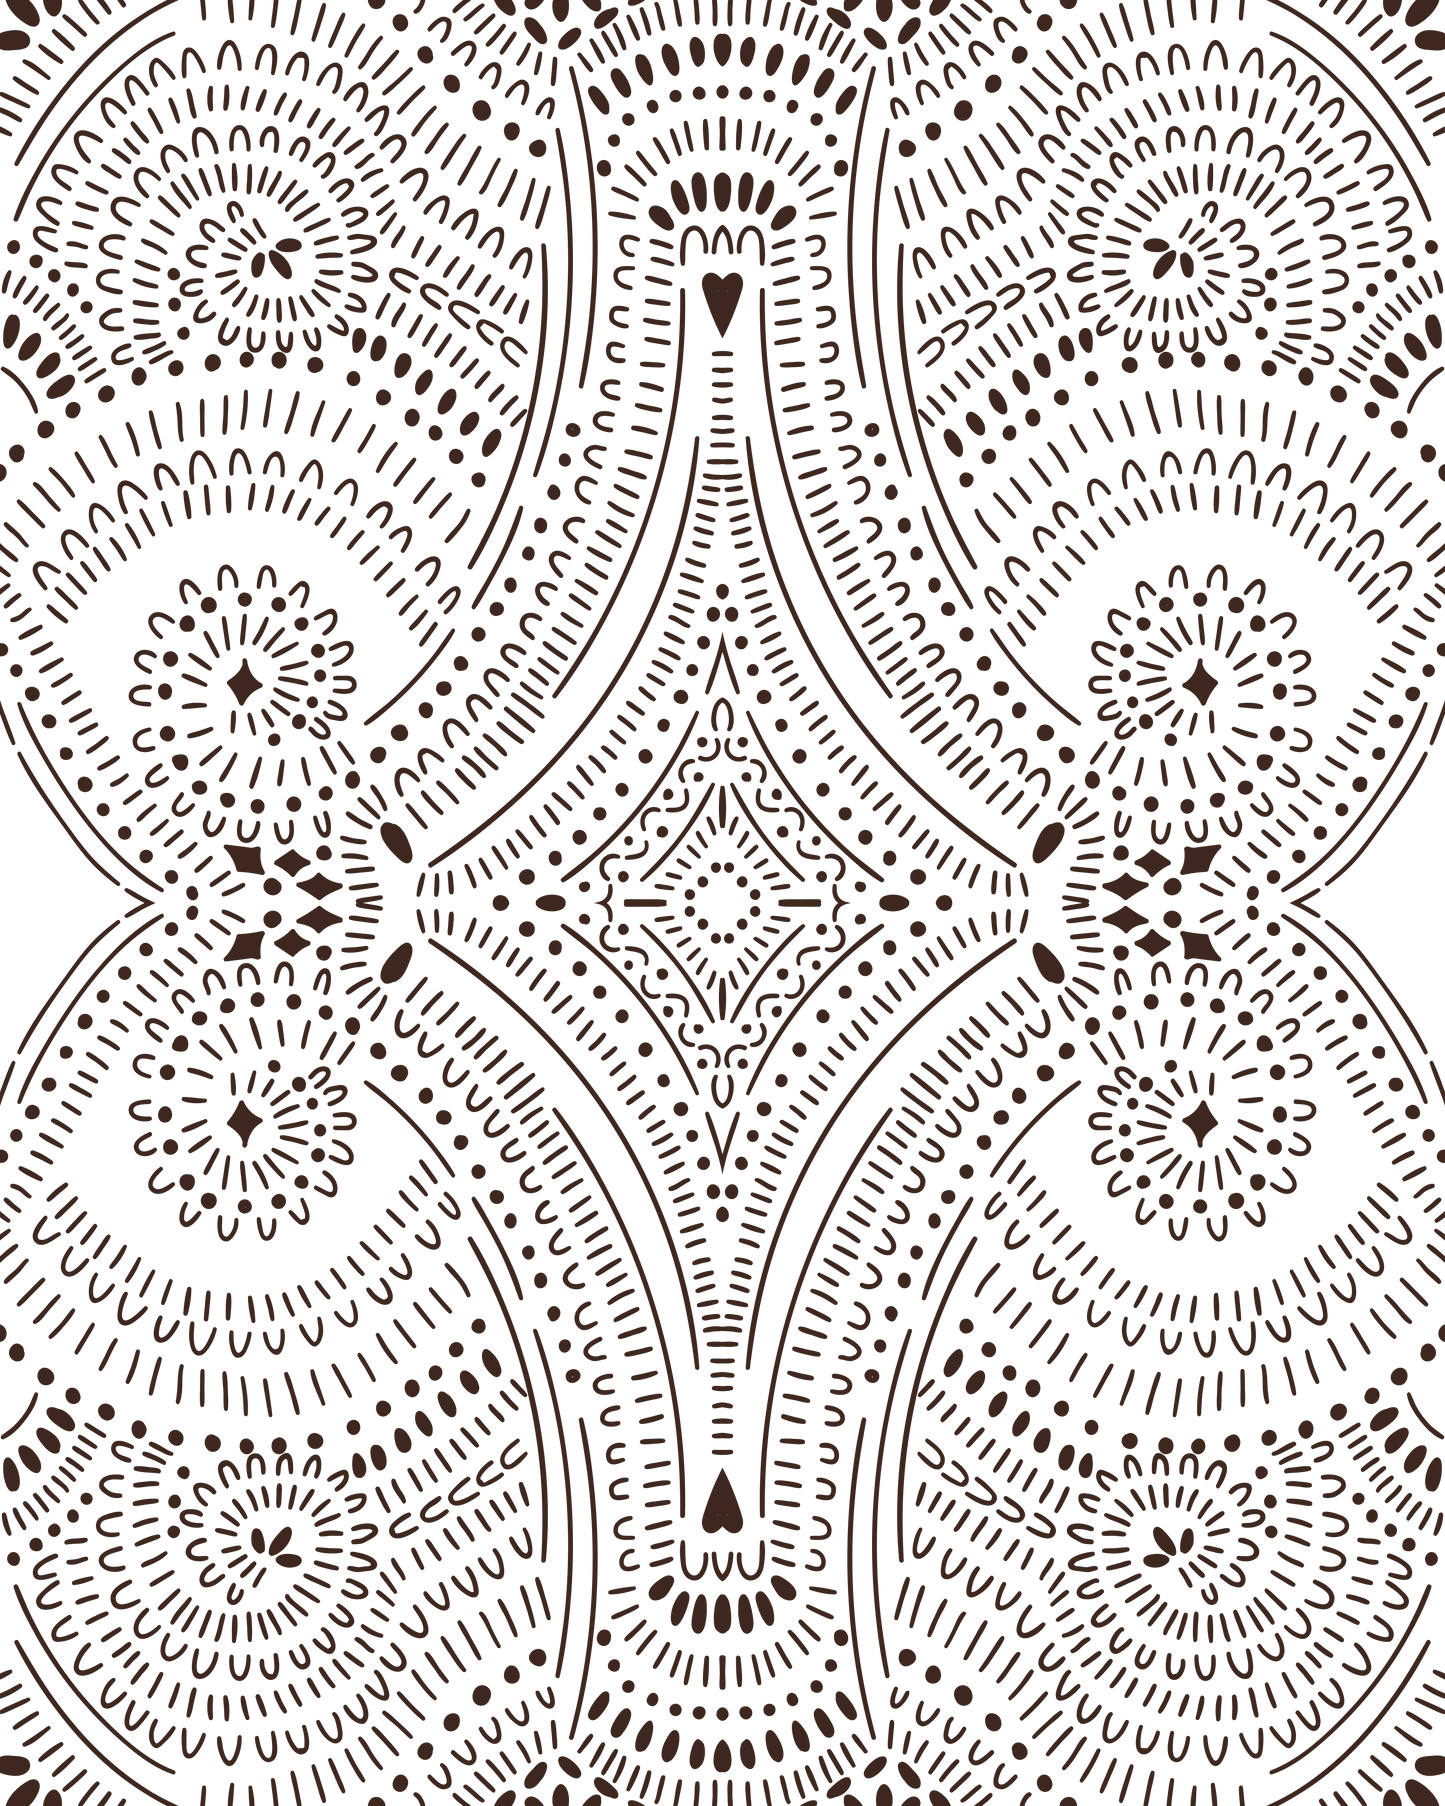 Various black henna designs on white background easy to install and remove peel and stick custom wallpaper available in different lengths/sizes locally created and printed in Canada Artichoke wallpaper. Washable, durable, commercial grade, removable and waterproof.